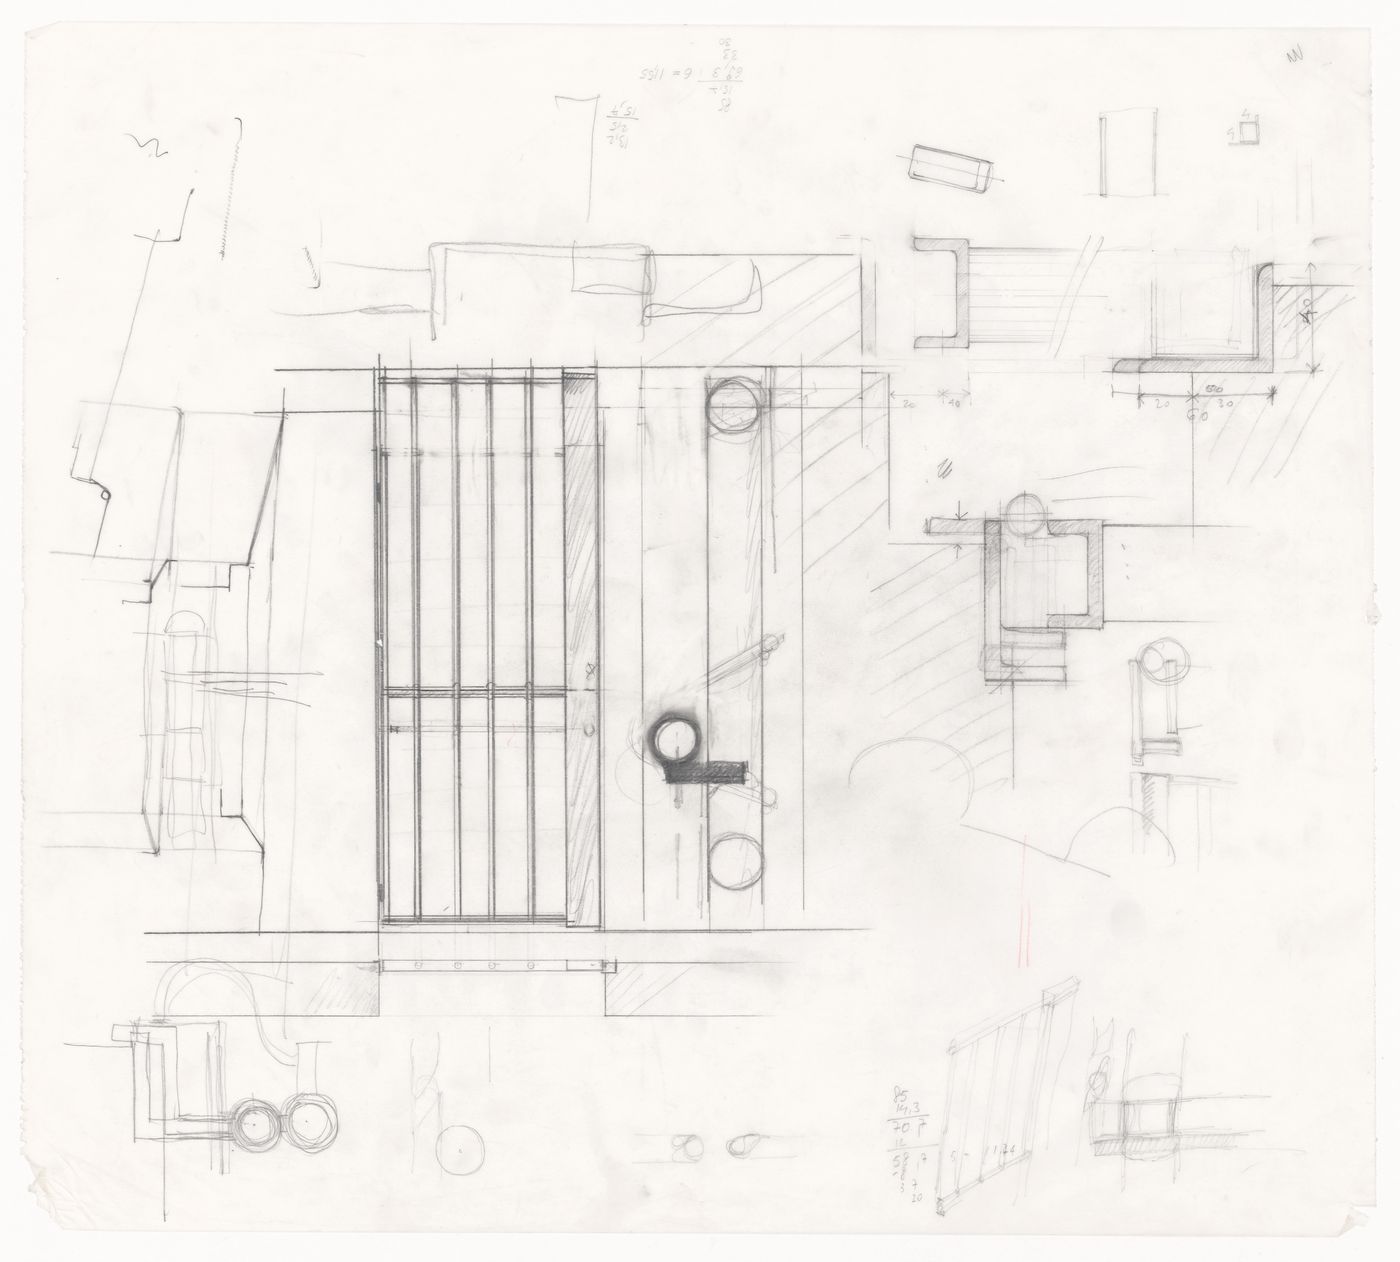 Details and sketches for Casa Miggiano, Otranto, Italy